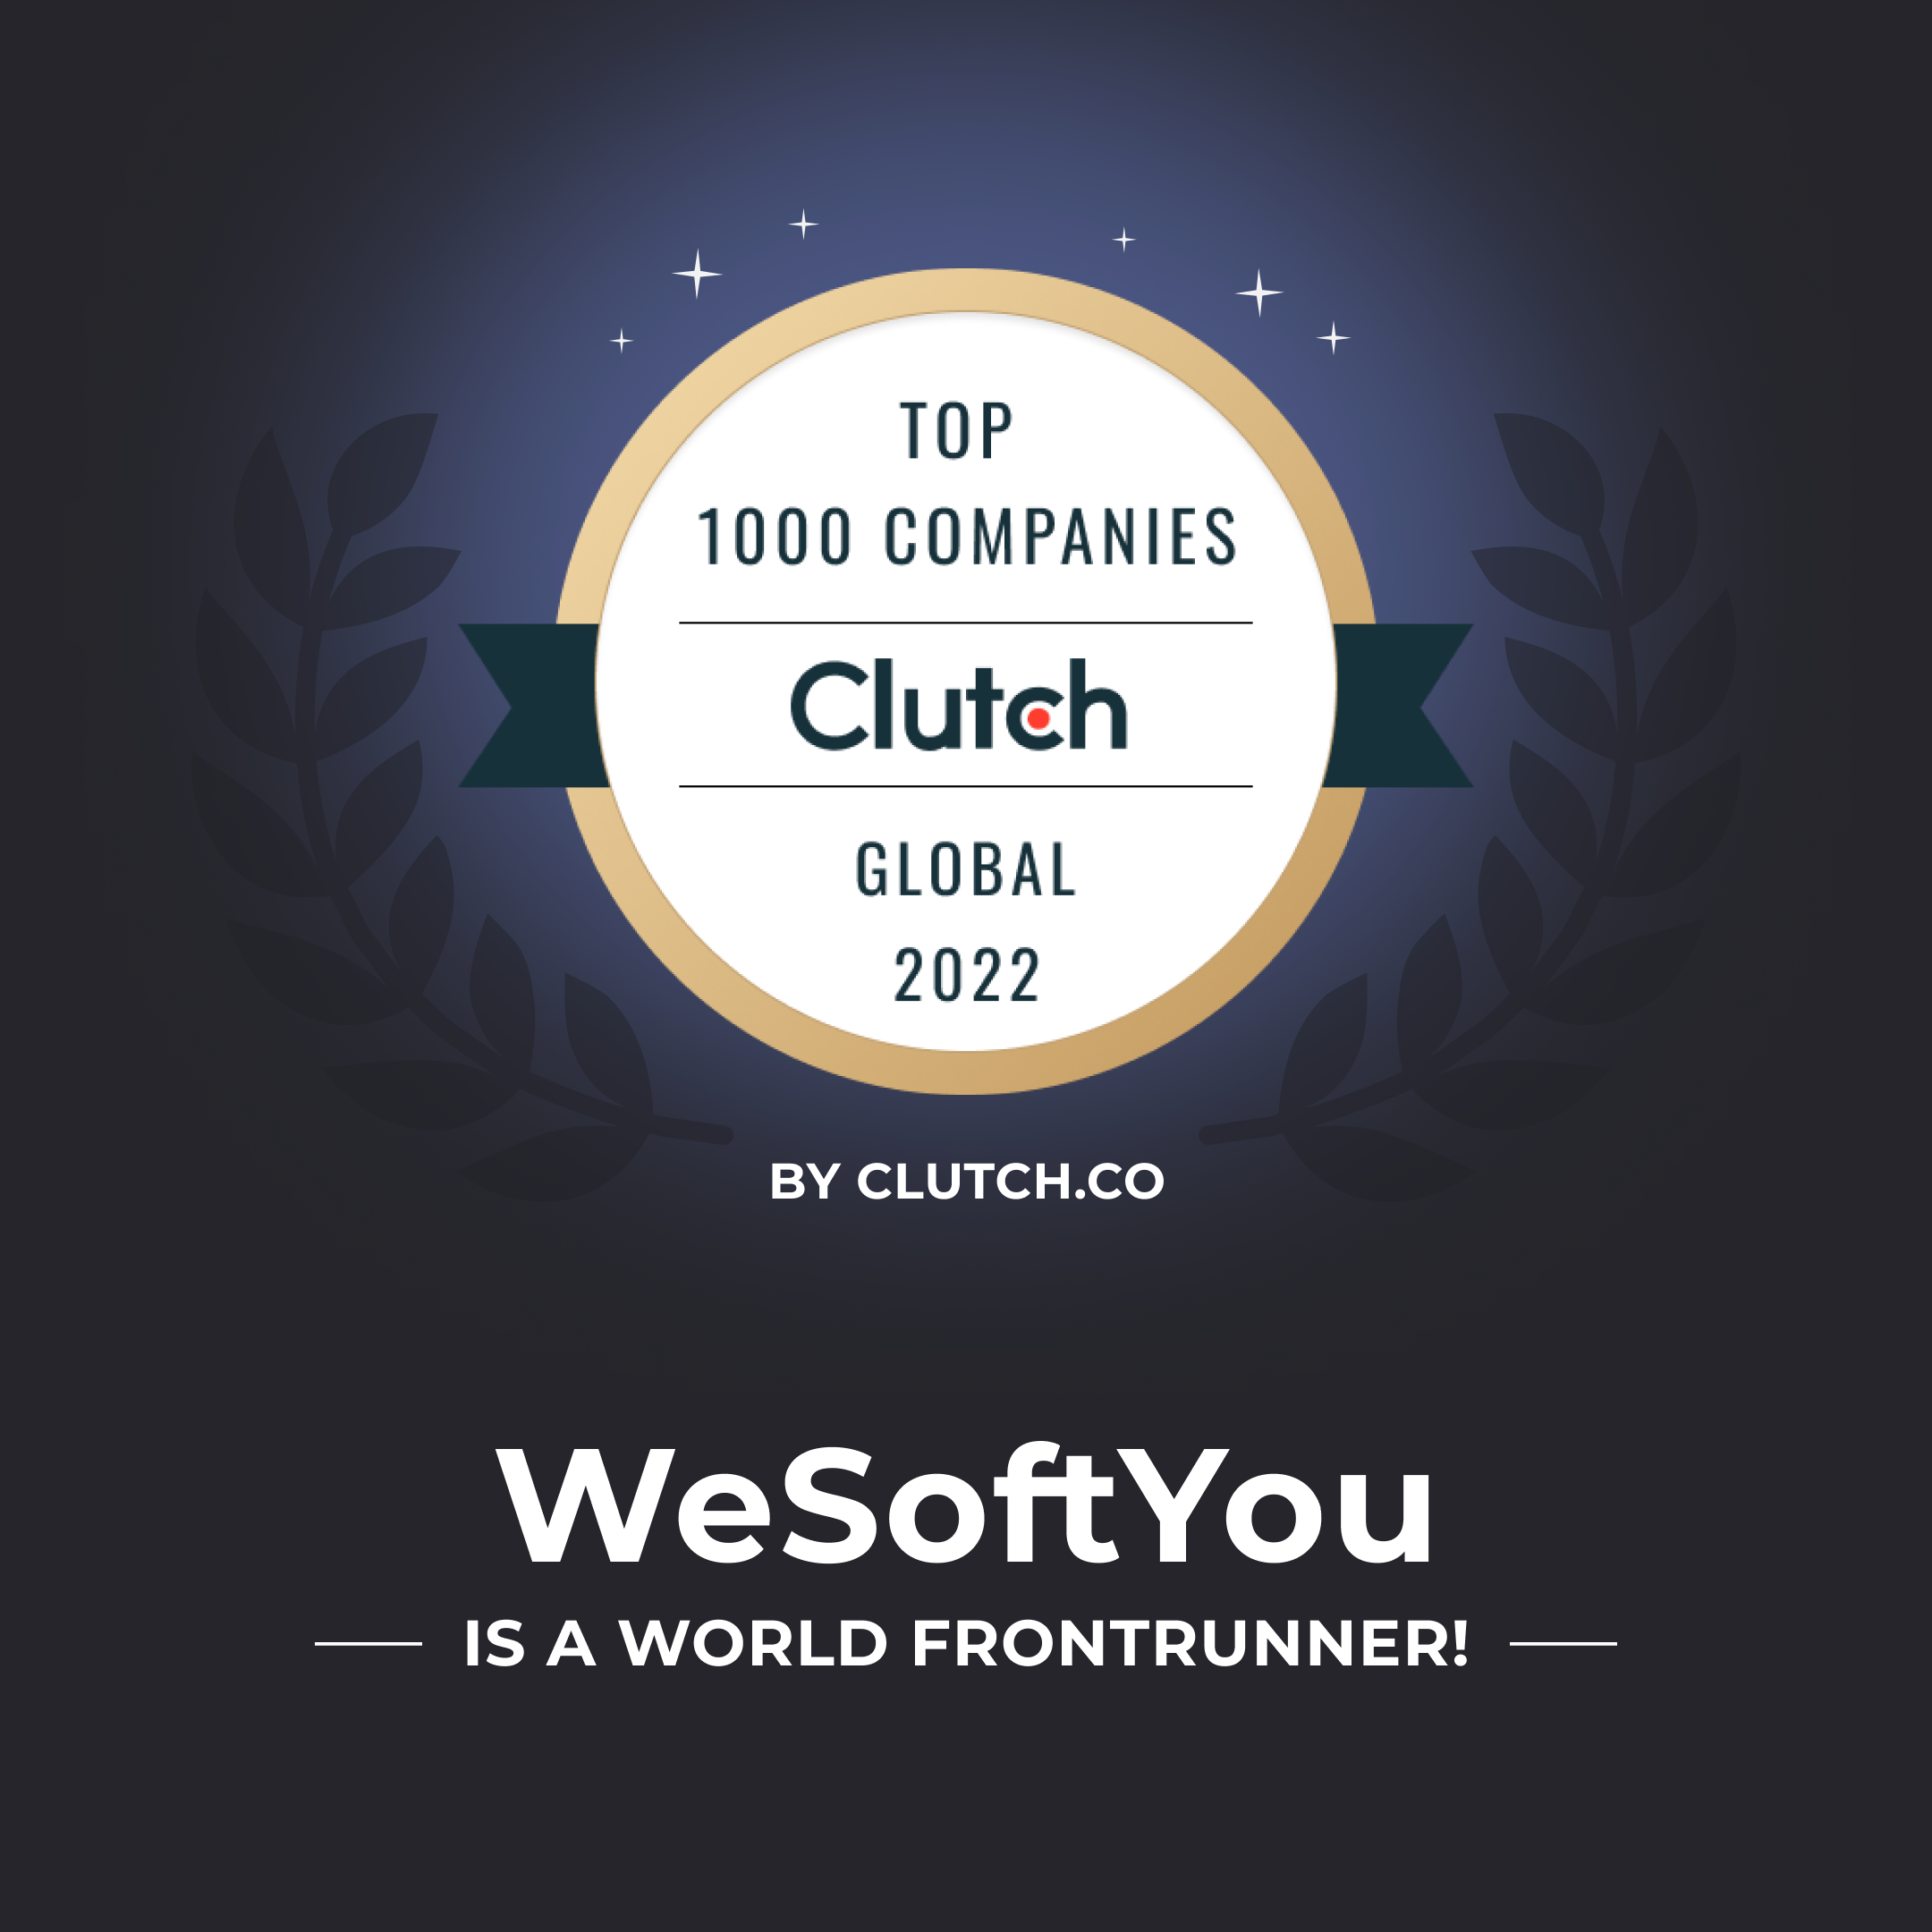 WSU is a world Frontrunner – Top 1% in the world by Clutch, image #9